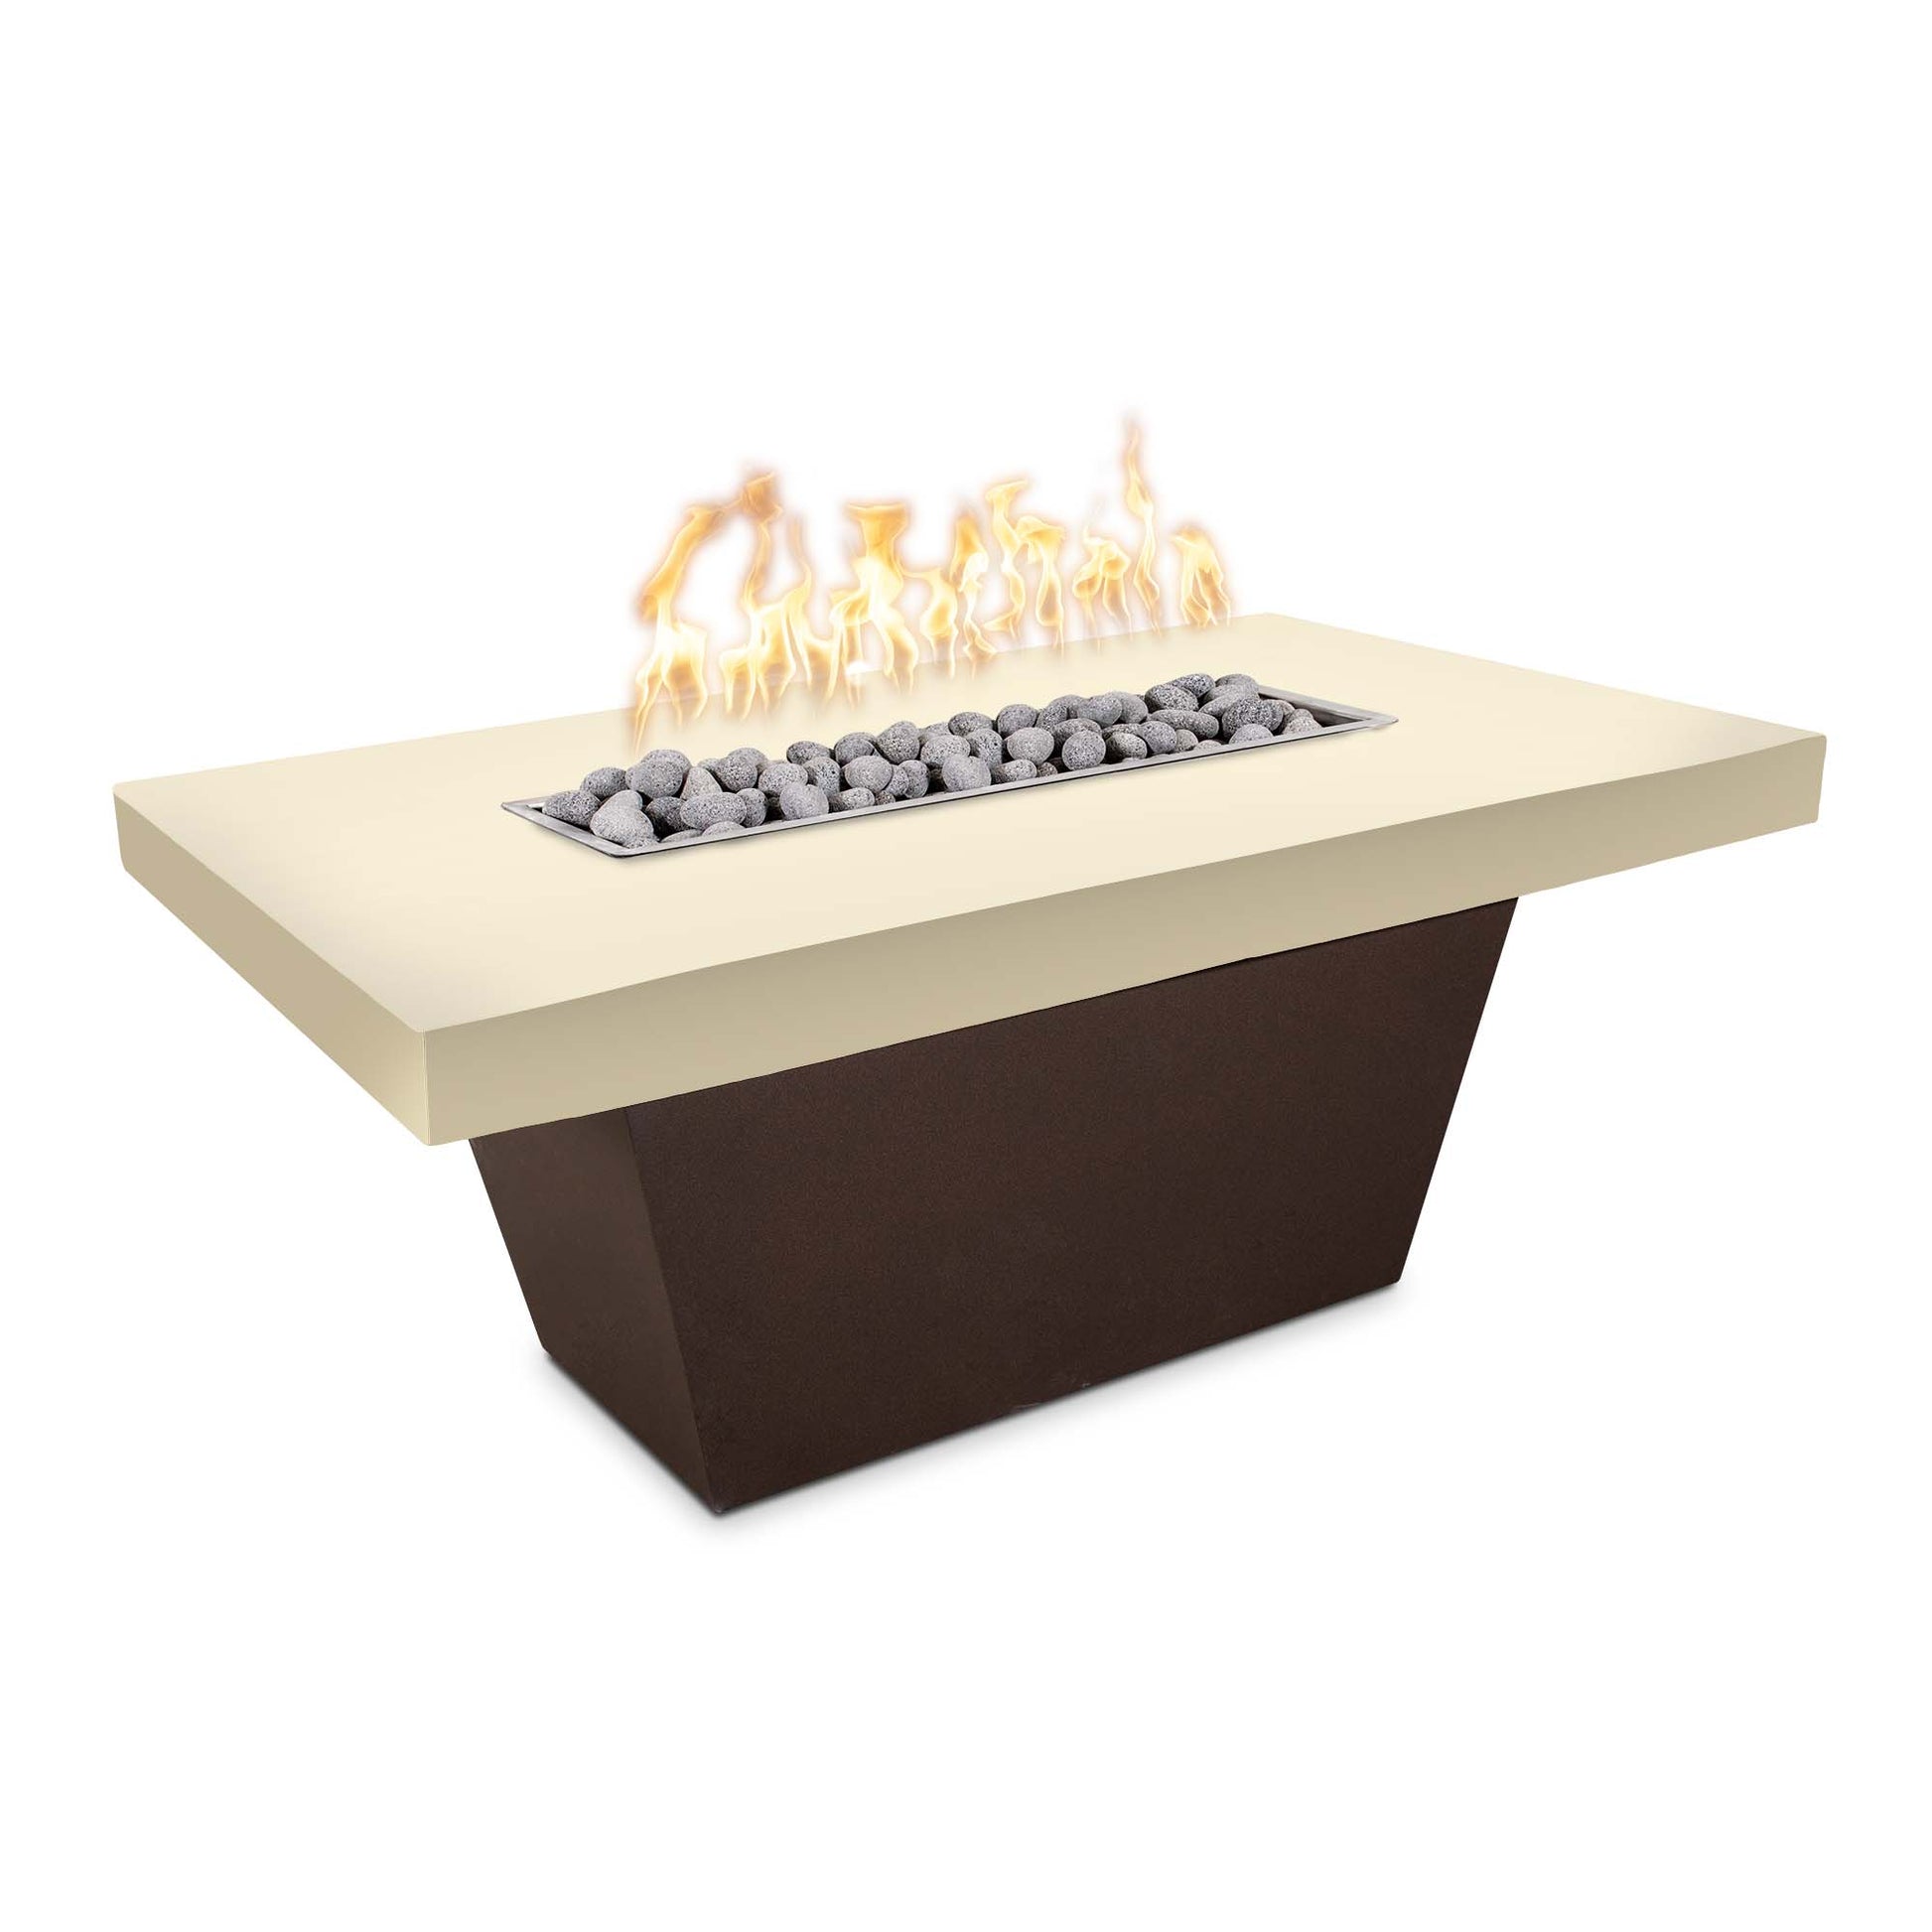 The Outdoor Plus Tacoma 48" Metallic Pearl Concrete Top & Java Powder Coated Base Natural Gas Fire Table with Match Lit Ignition